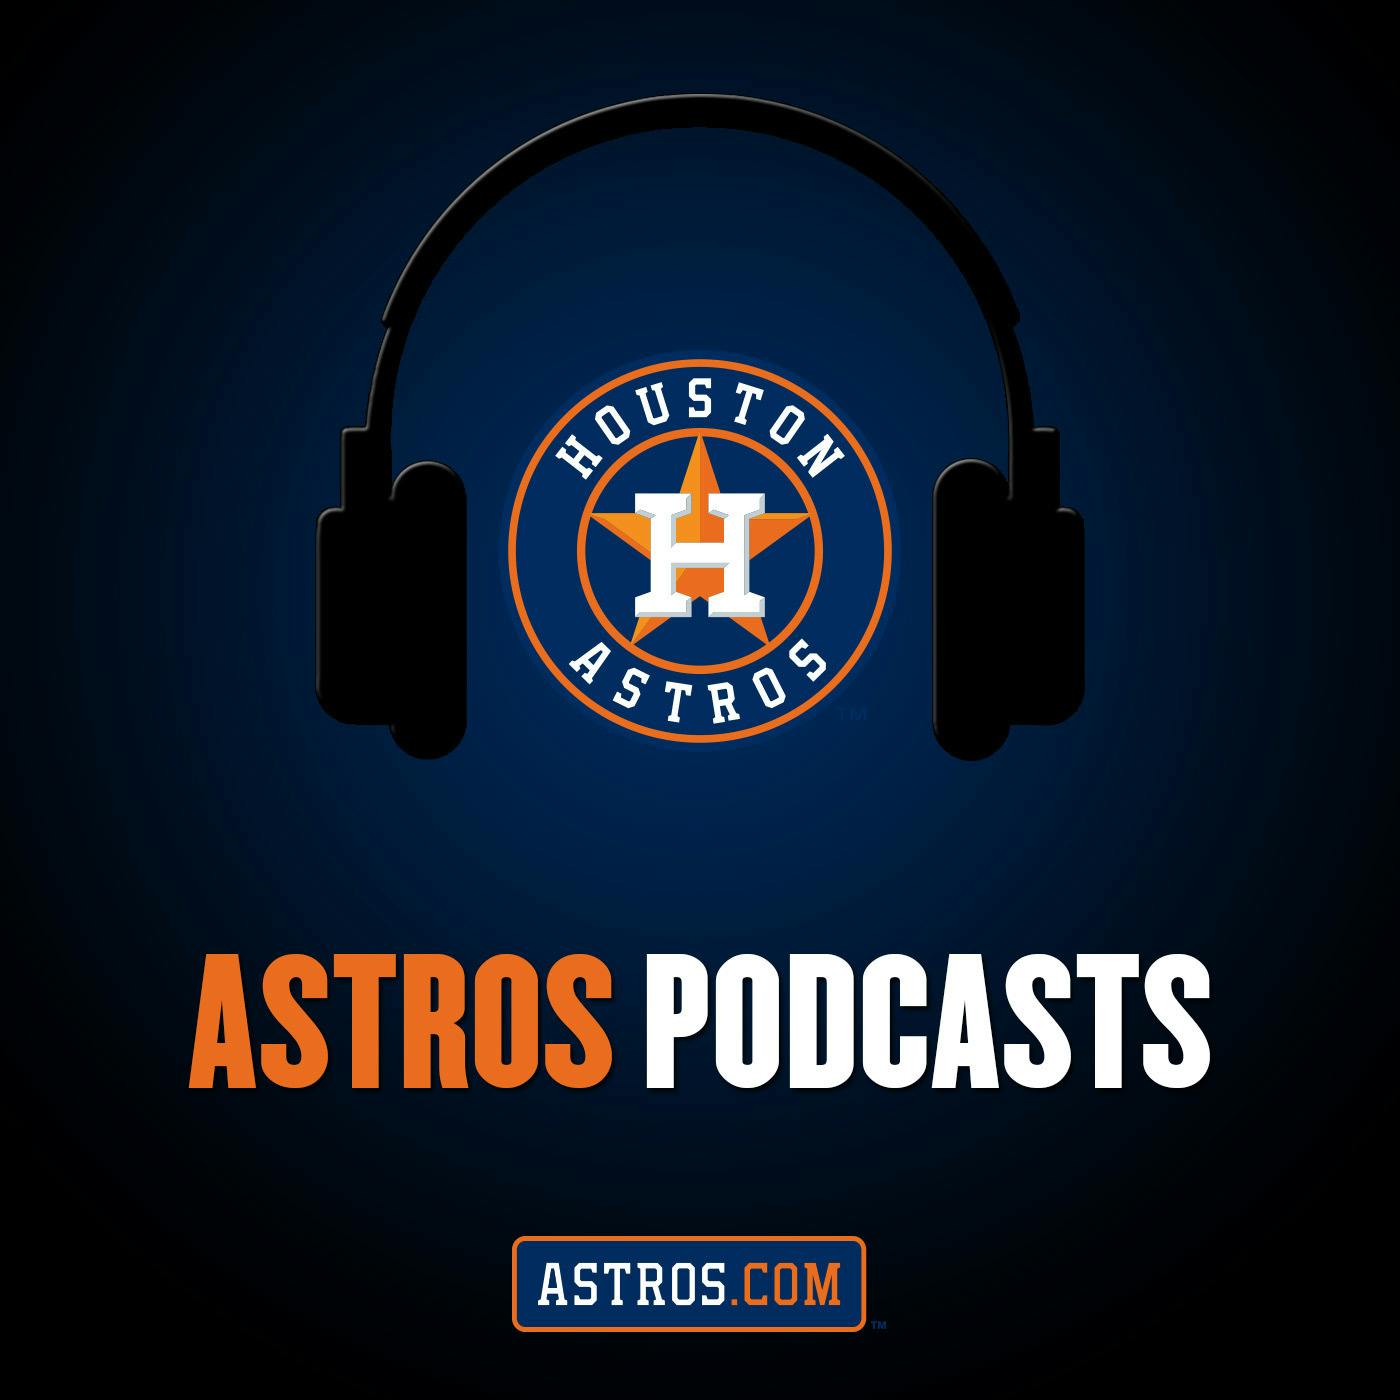 12/17 Astroline Hot Stove Podcast by Karbach Brewing: Brooks Raley, Andre Scrubb, Steve Sparks, Bill Brown